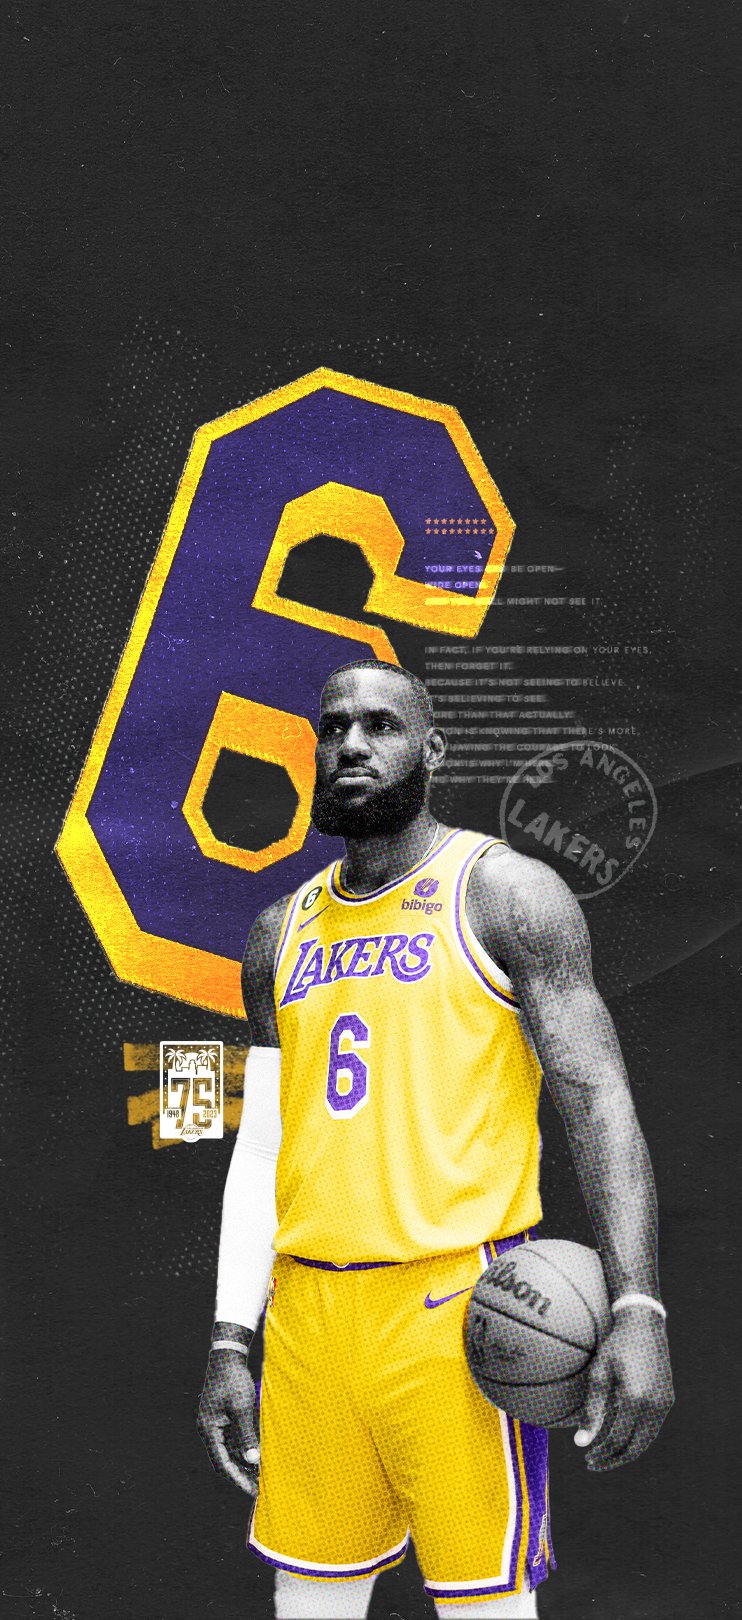 Los Angeles Lakers One: Save as new wallpaper Step Two: #VoteLakers ⭐️